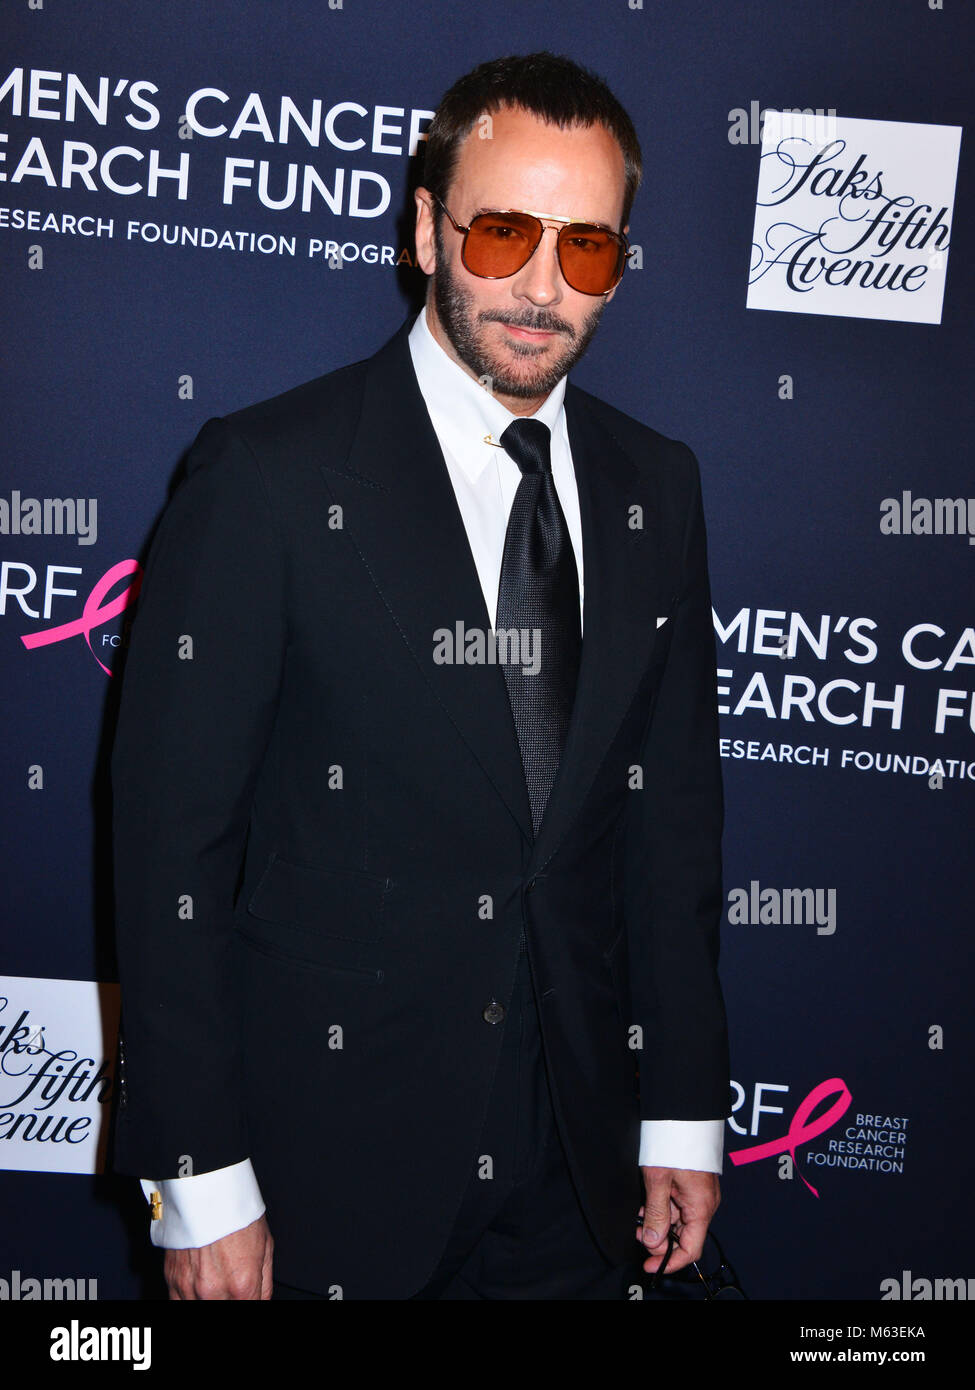 Los Angeles, California, USA. 27th Feb, 2018. Tom Ford 068 arrives at the  The Women's Cancer Research Fund's An Unforgettable Evening Benefit Gala at  the Beverly Wilshire Four Seasons Hotel on February